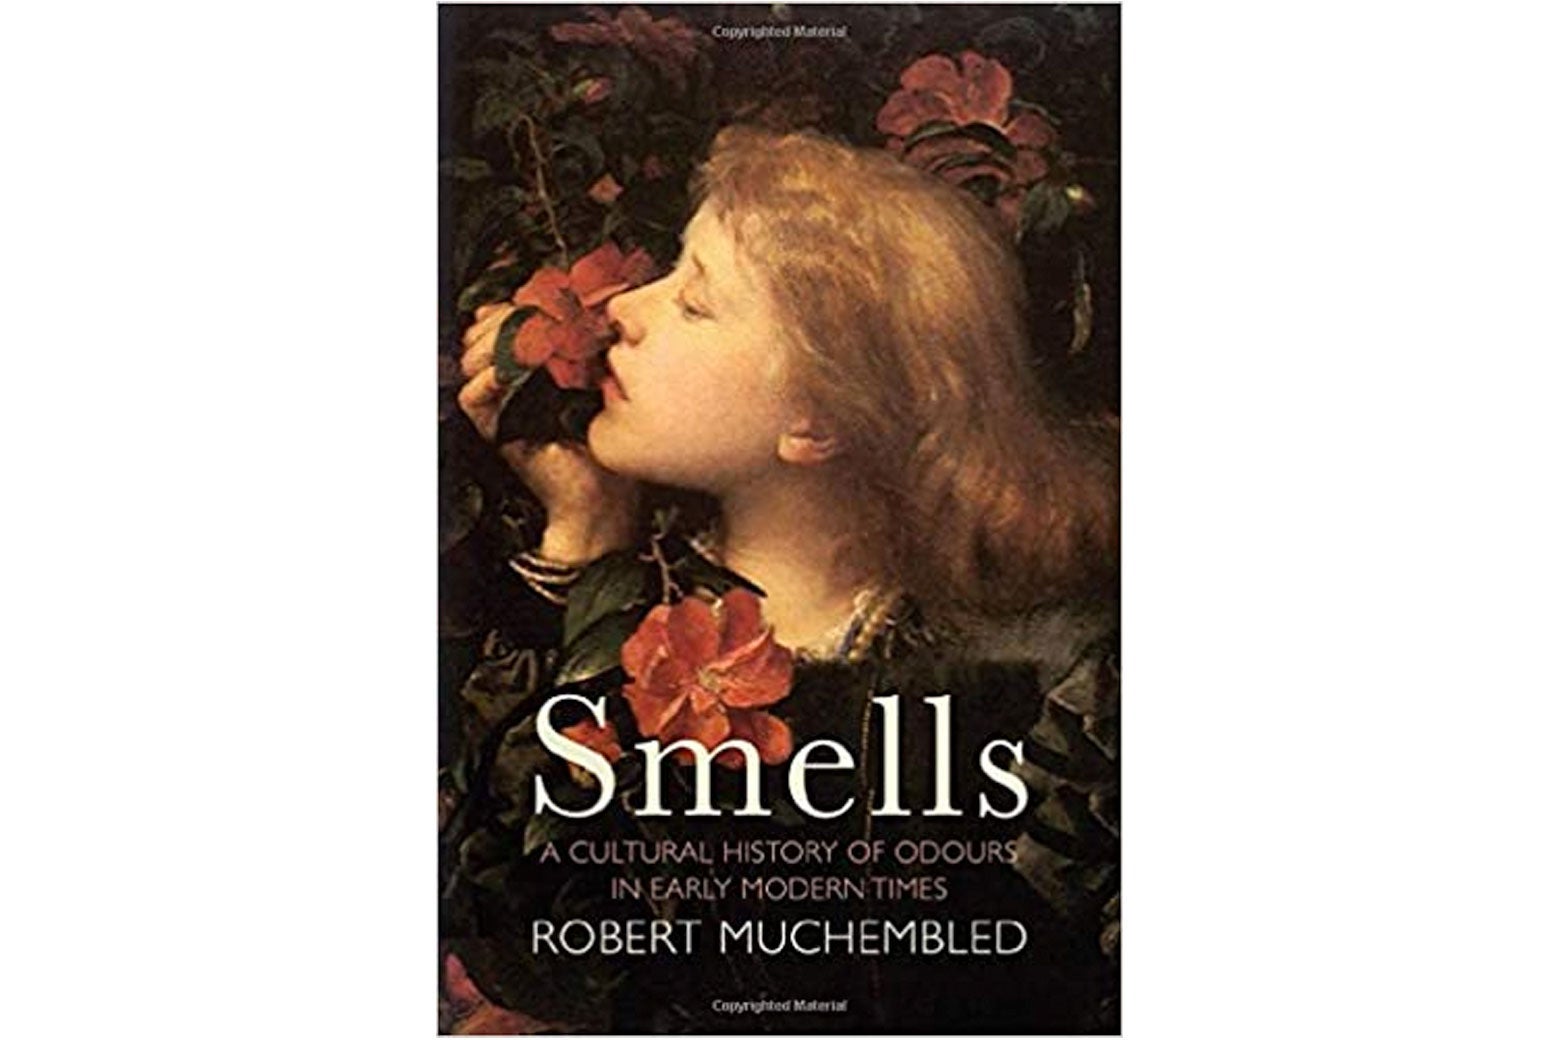 A book cover shows a painting of a woman smelling a flower. Title: Smells, a Cultural History of Odours in Early Modern Times. Robert Muchembled.